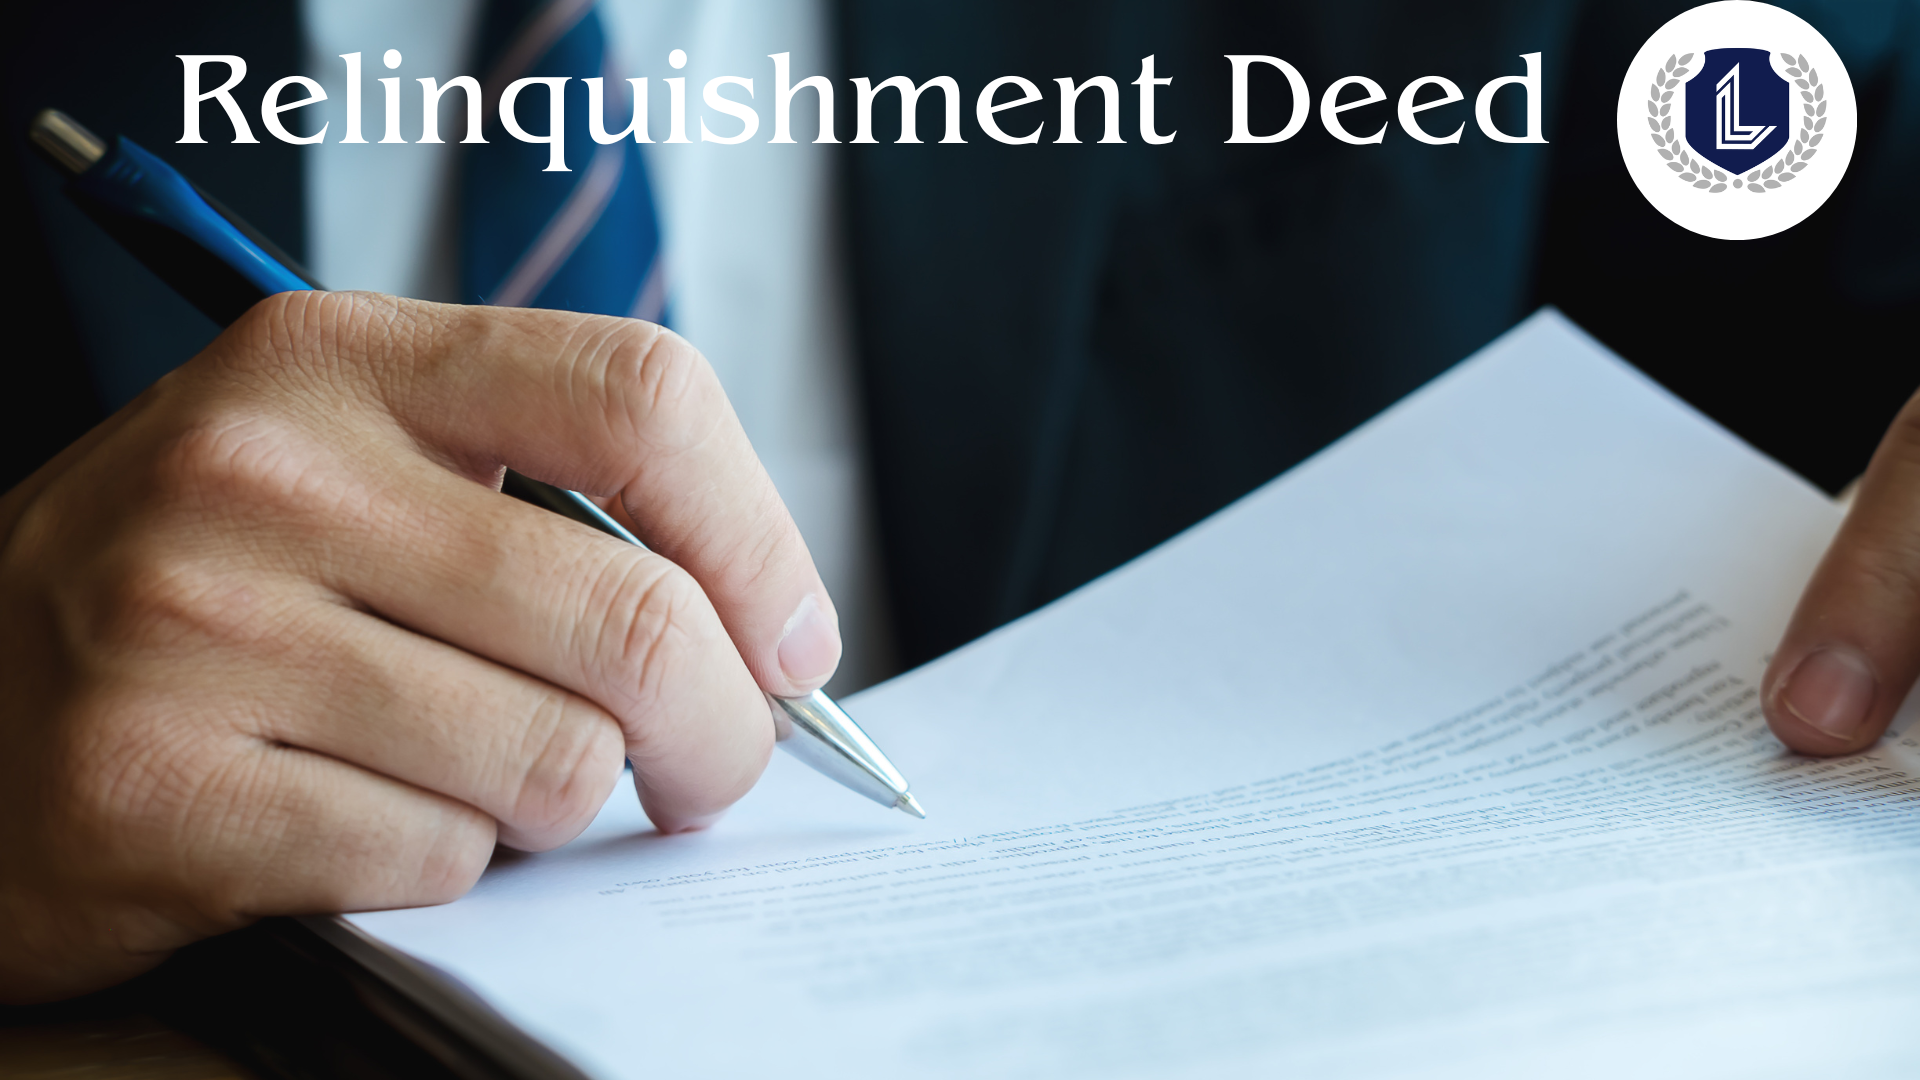 Relinquishment Deed for Property - A Comprehensive Guide